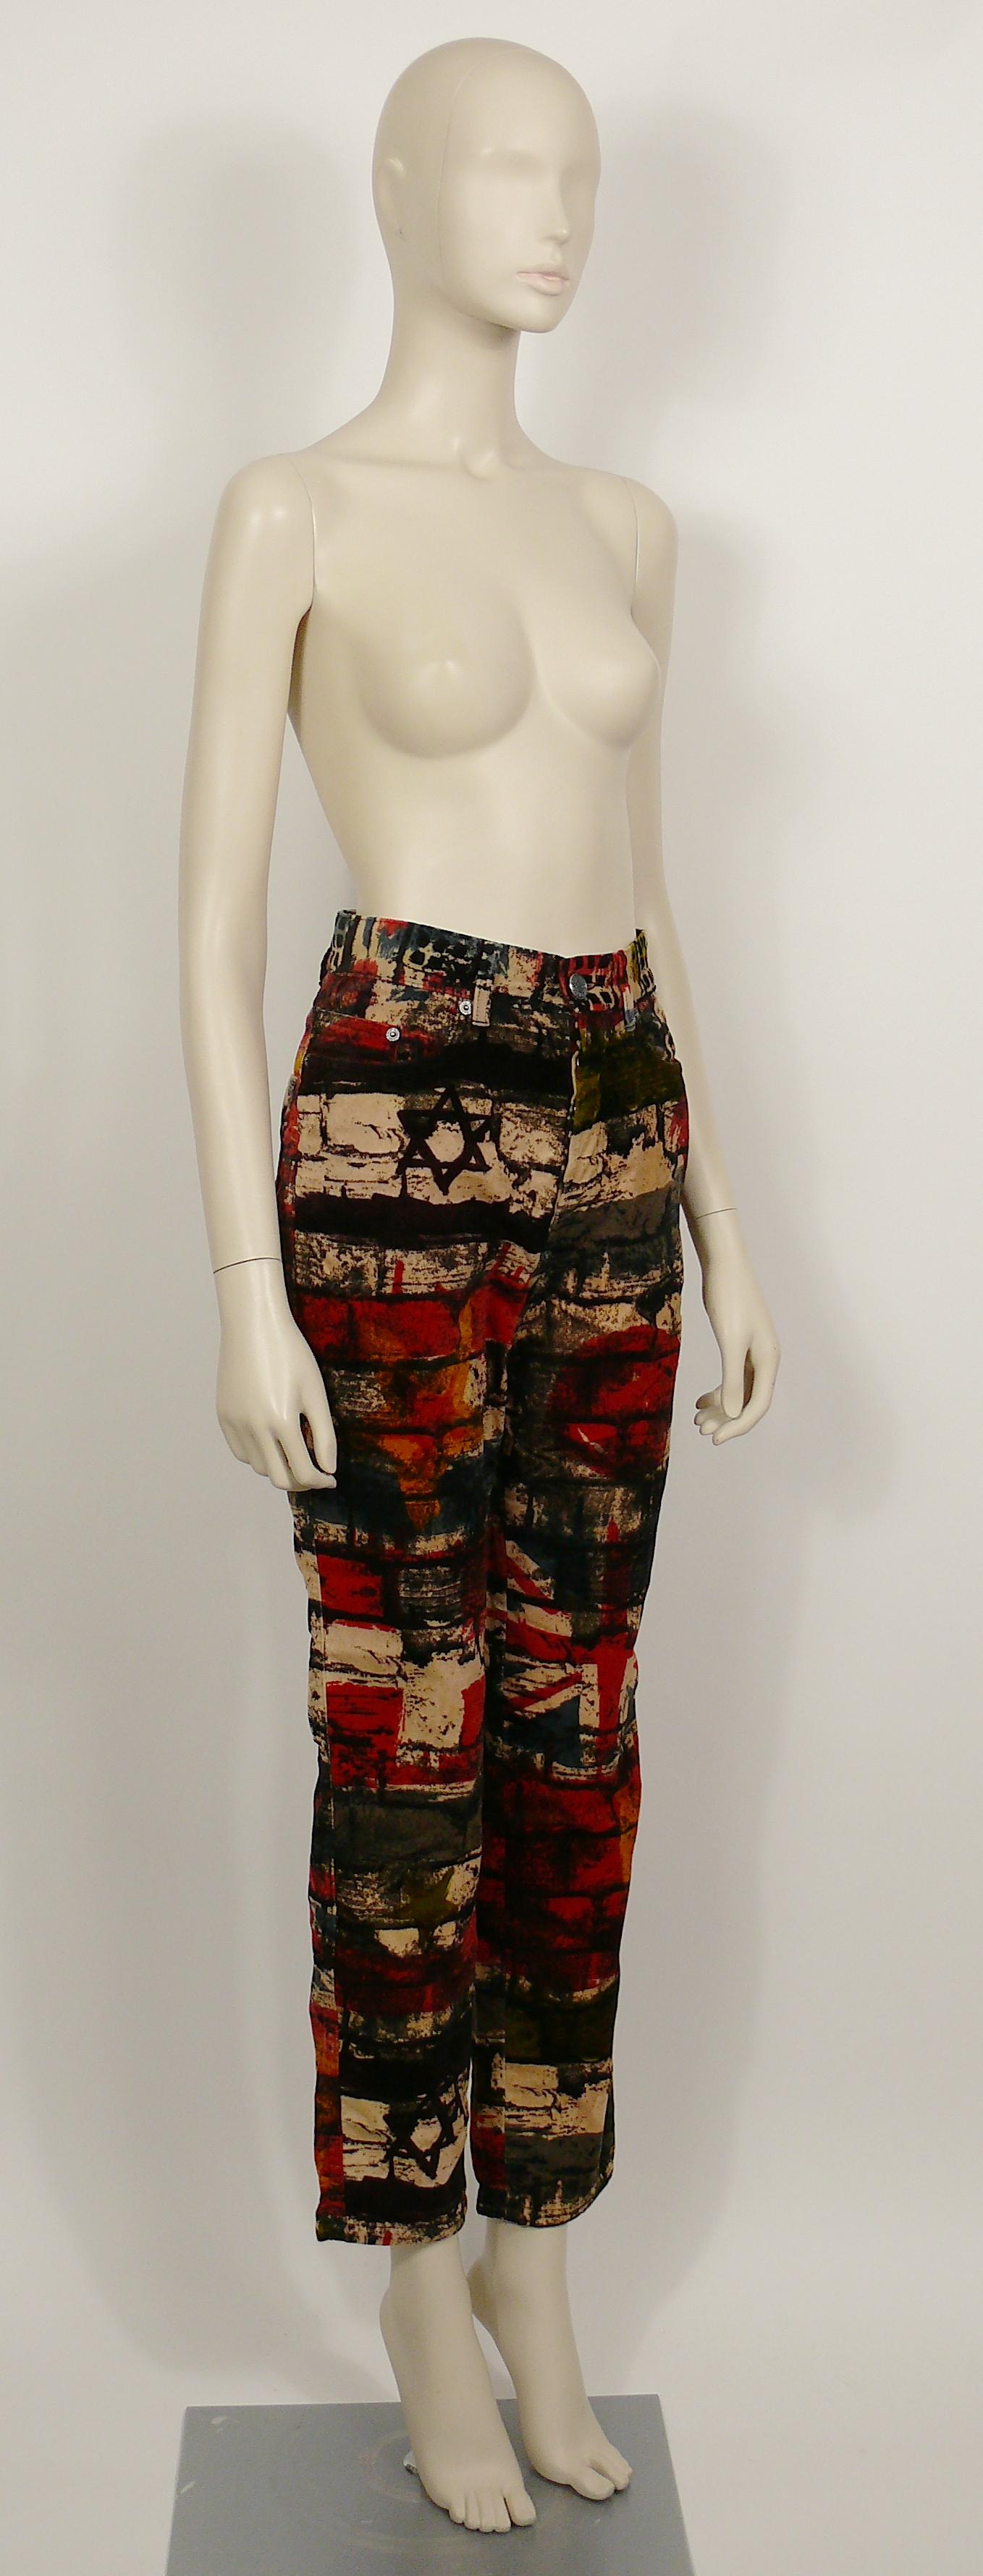 JEAN PAUL GAULTIER vintage pants trousers featuring a multi colored wall and flags print.

These trousers feature :
- Velvety touch material.
- Front buttoning.
- Front and back pockets.
- Belt loops and signature brand loop at the back.

Label